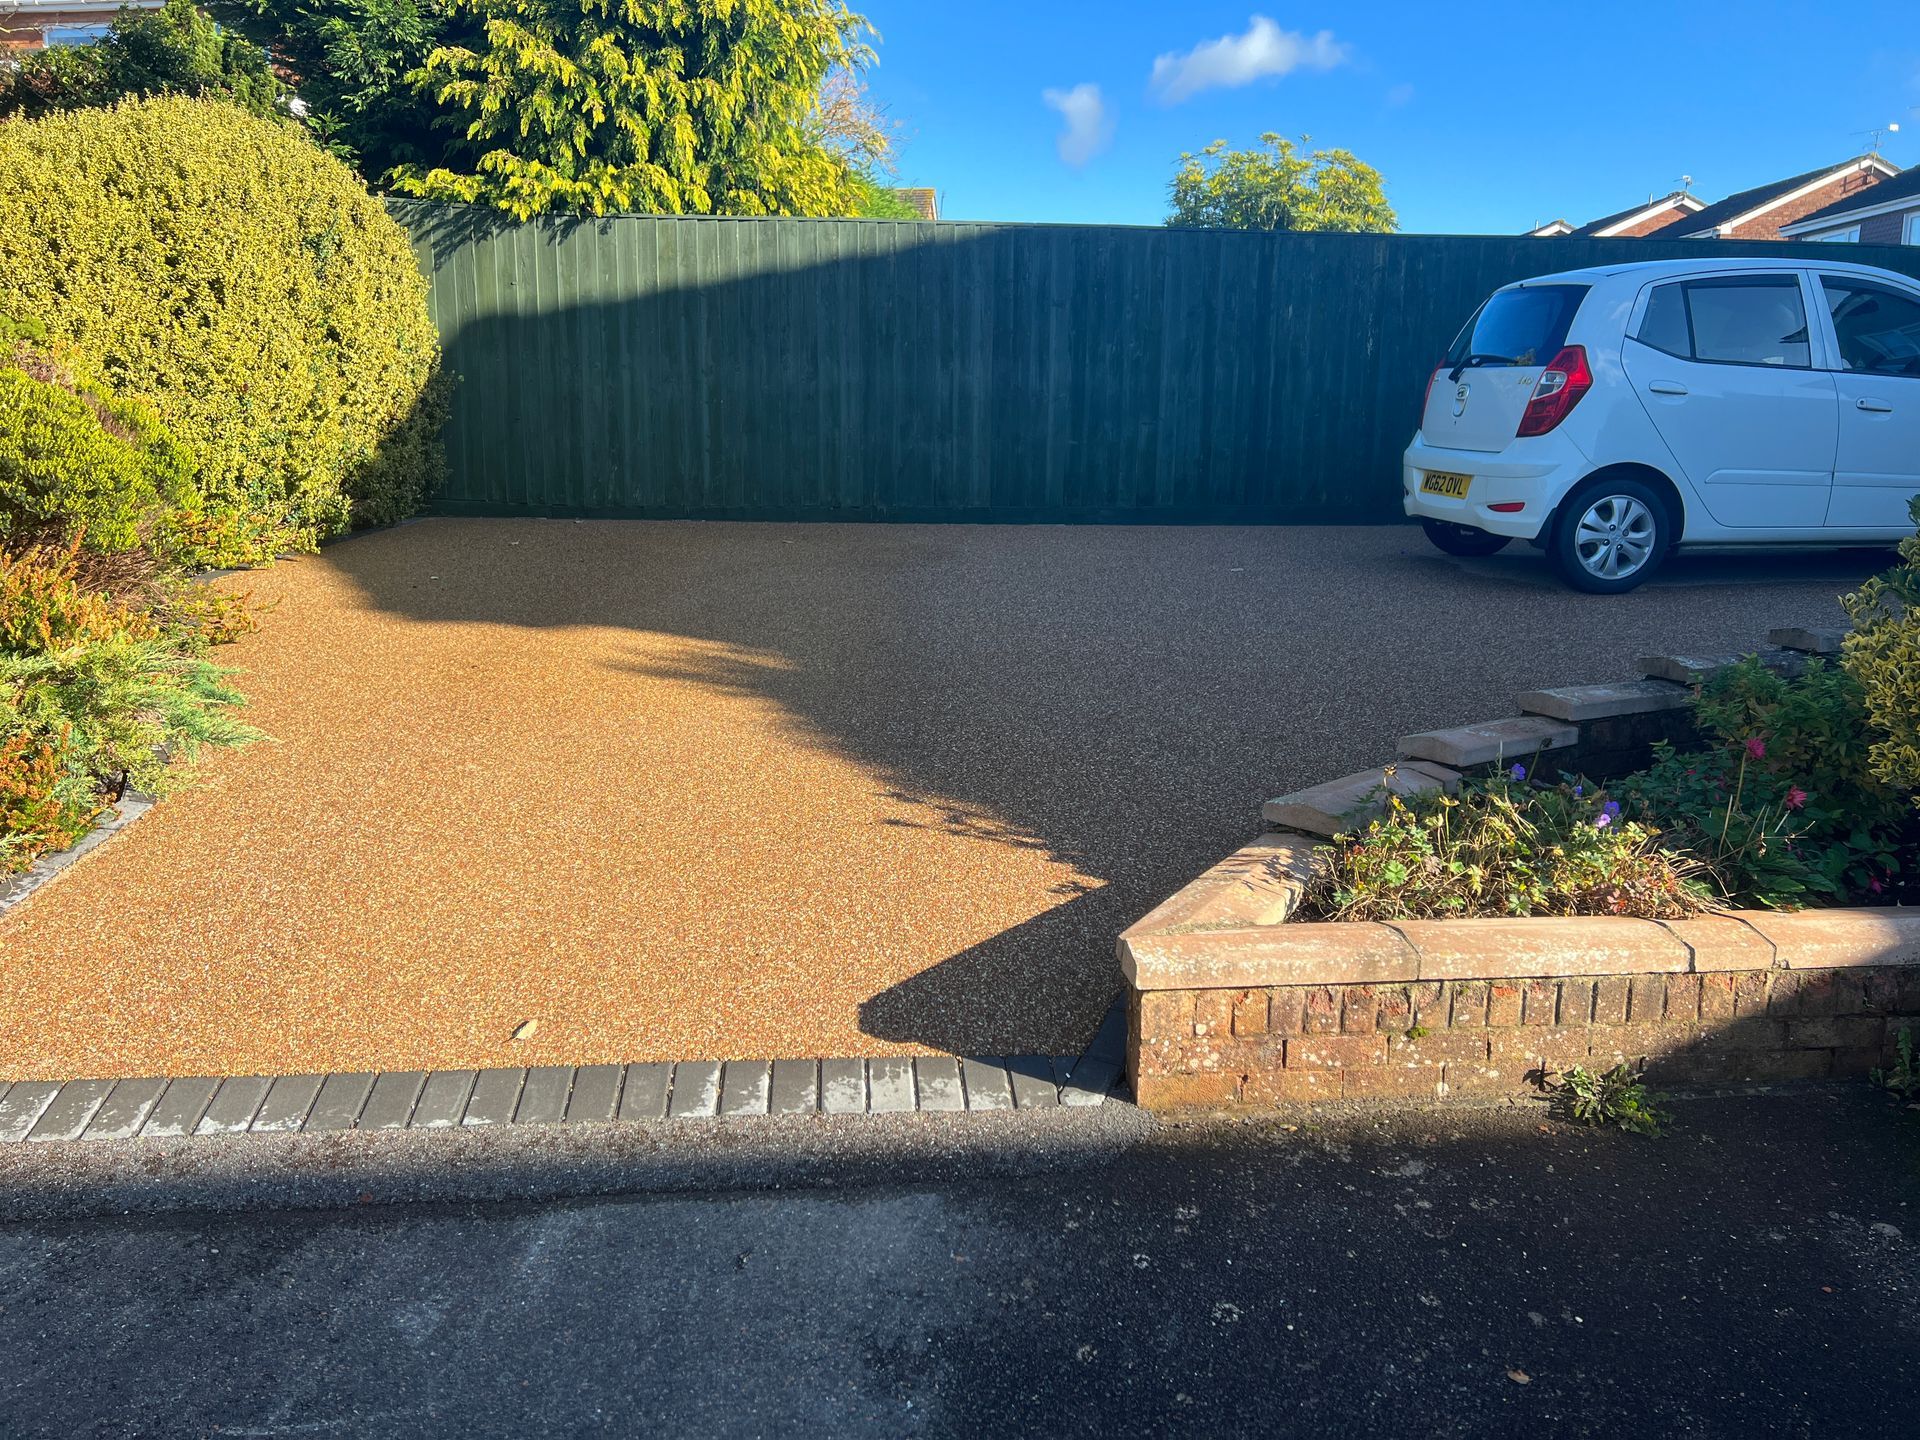 Light brown resin driveway with a white car parked on it.